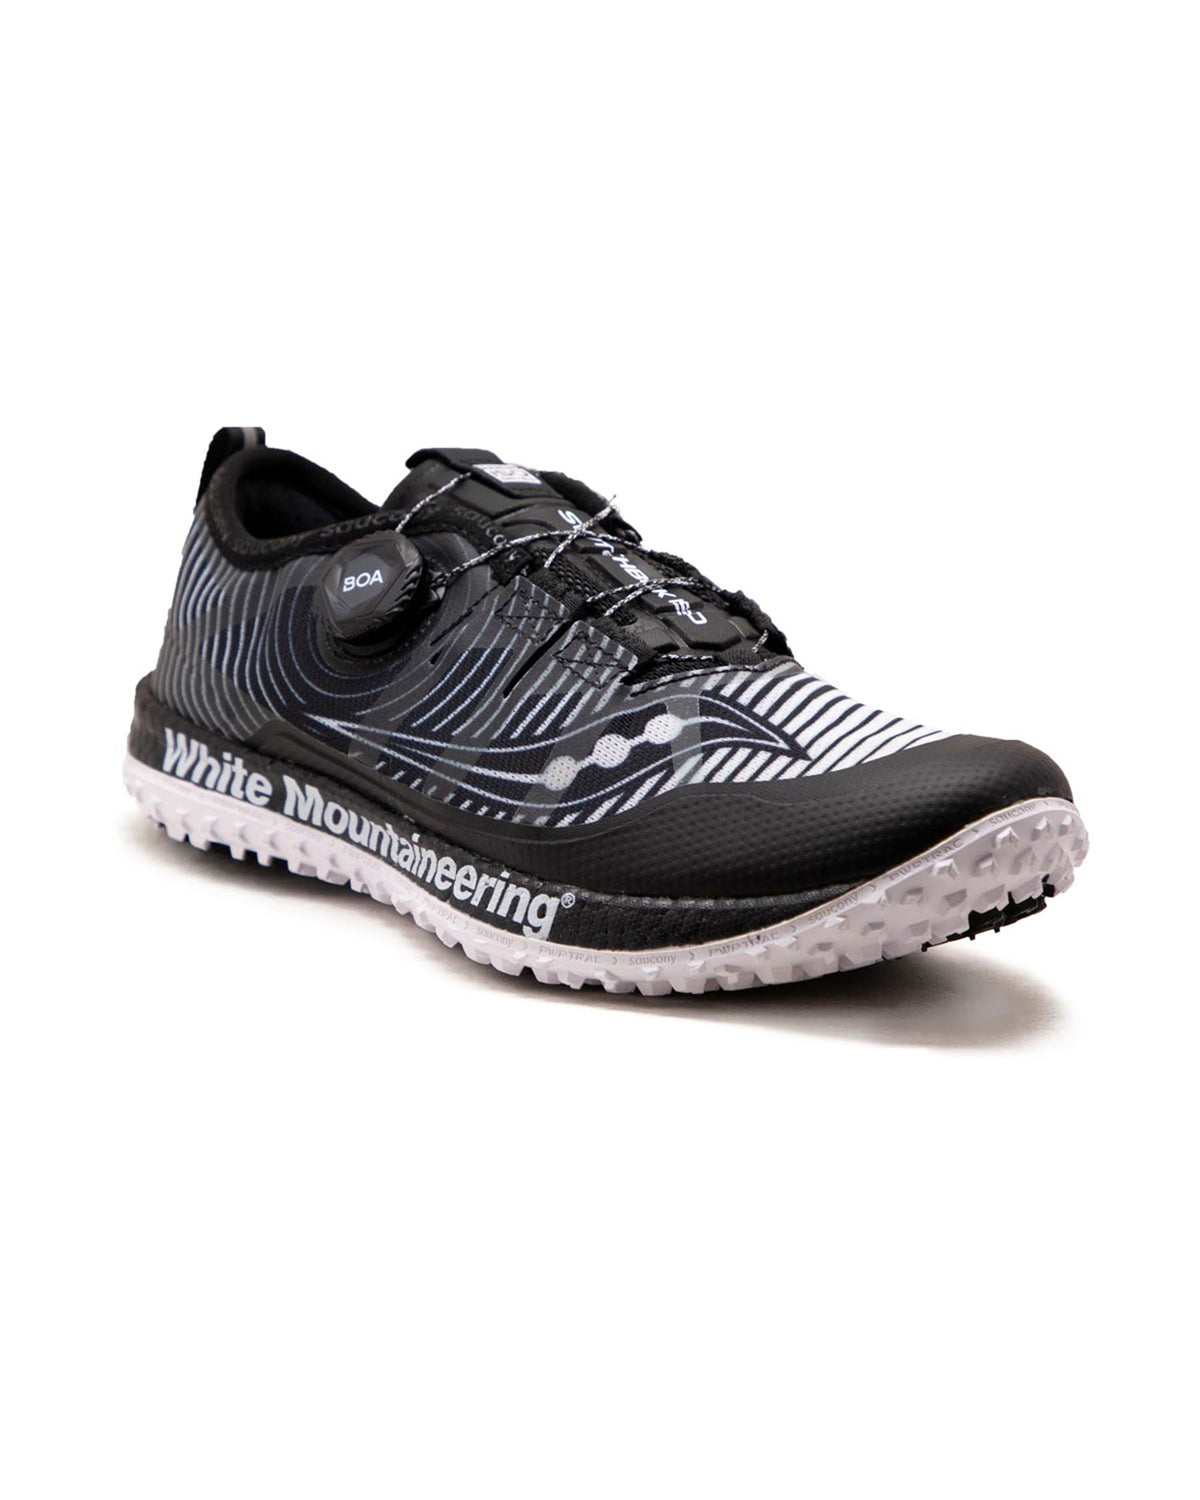 White Mountainering X Saucony Switchback Black S20482-50